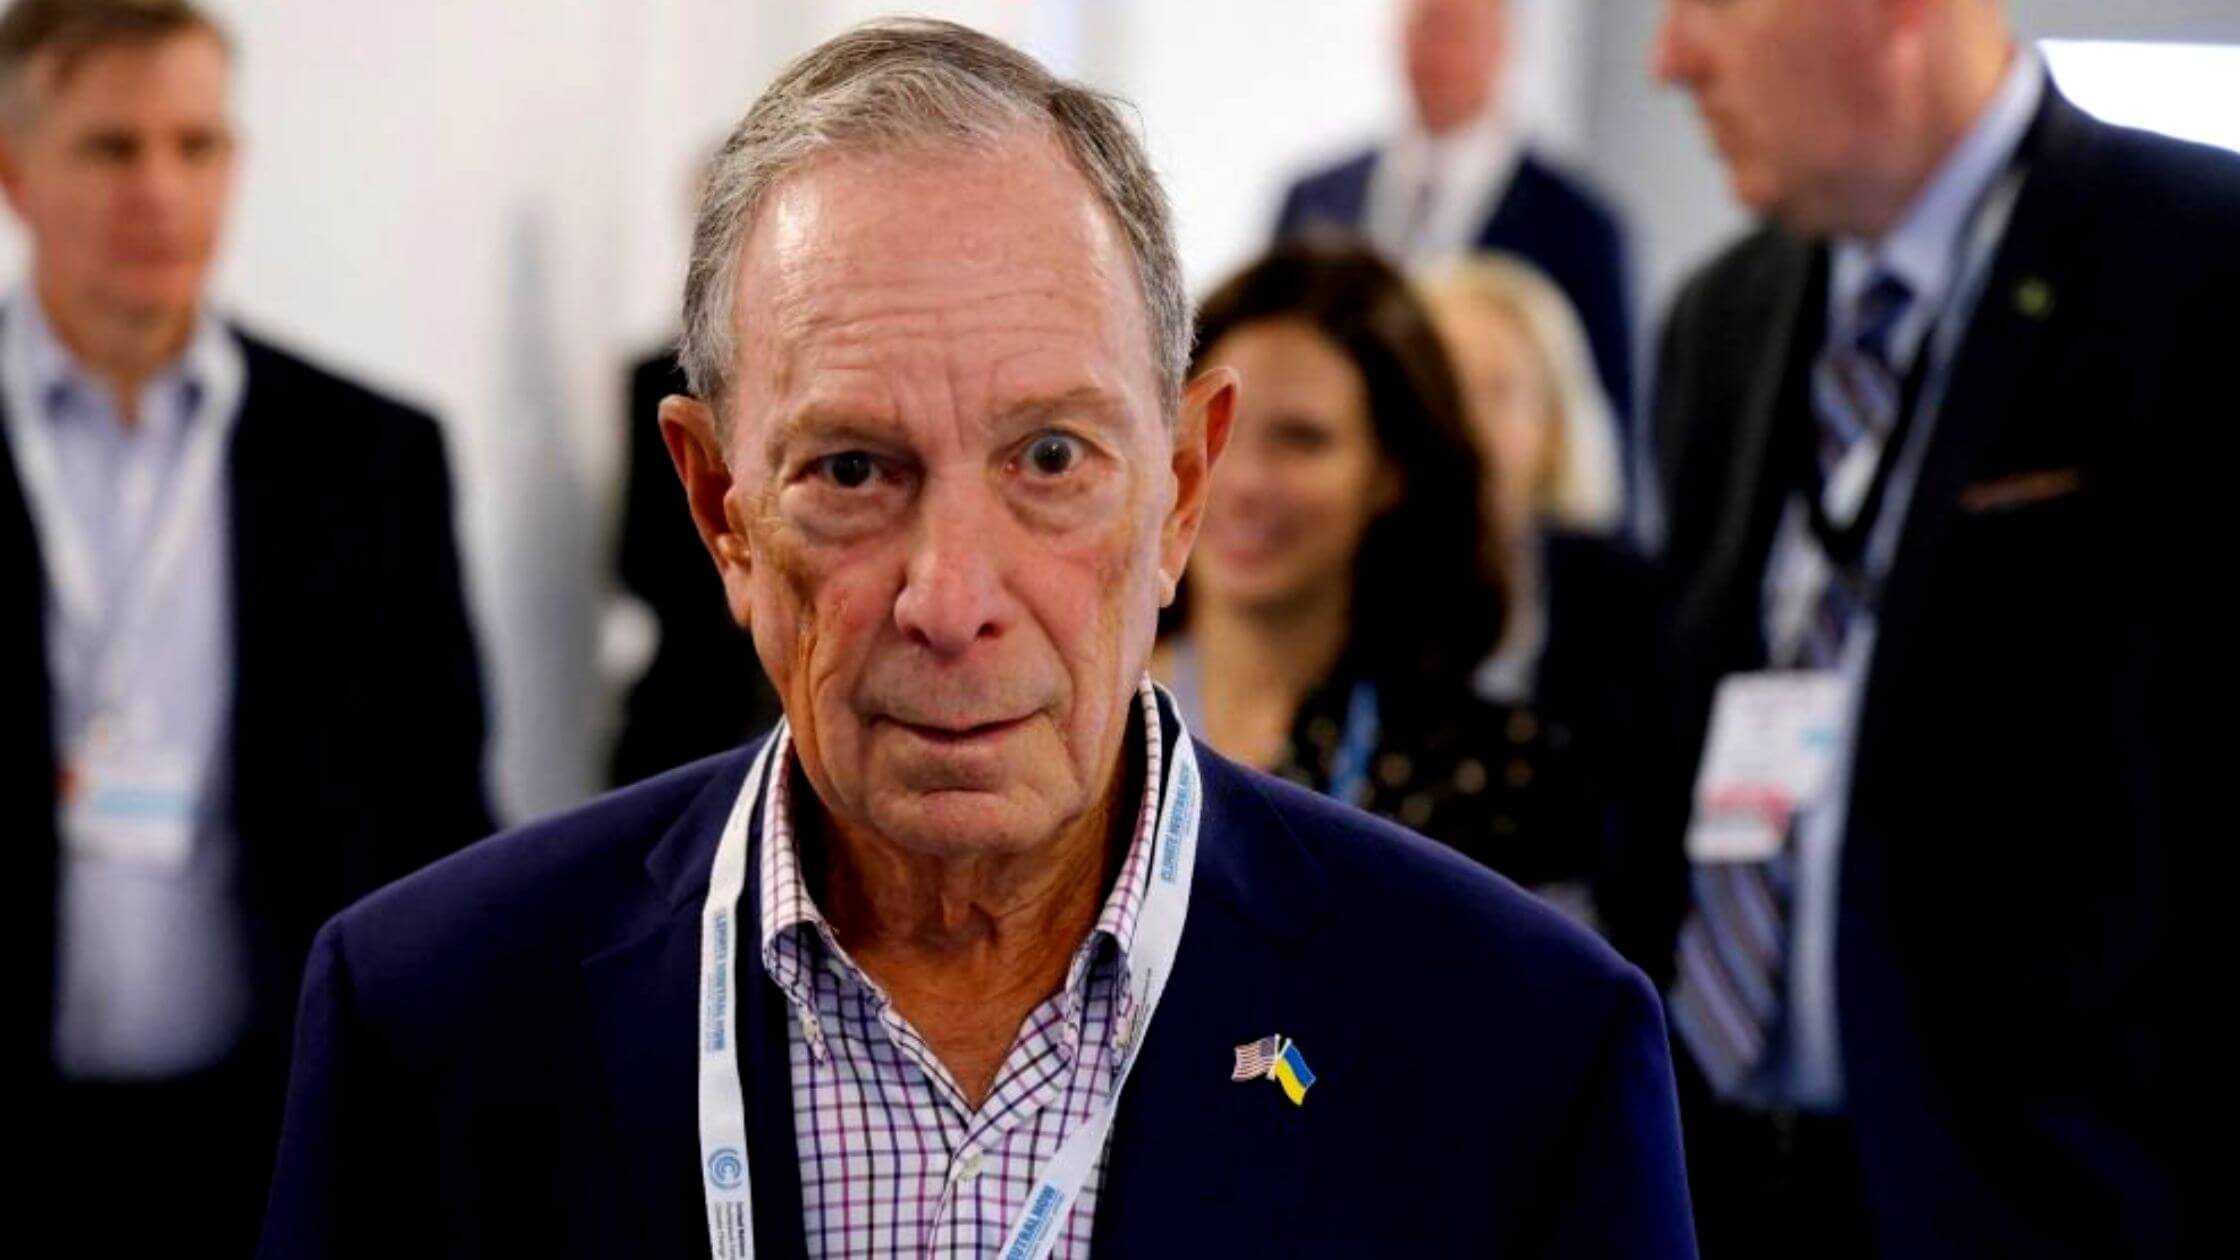 Bloomberg Has No Interest In Owning Dow Jones Or Washington Post Spokesman Says